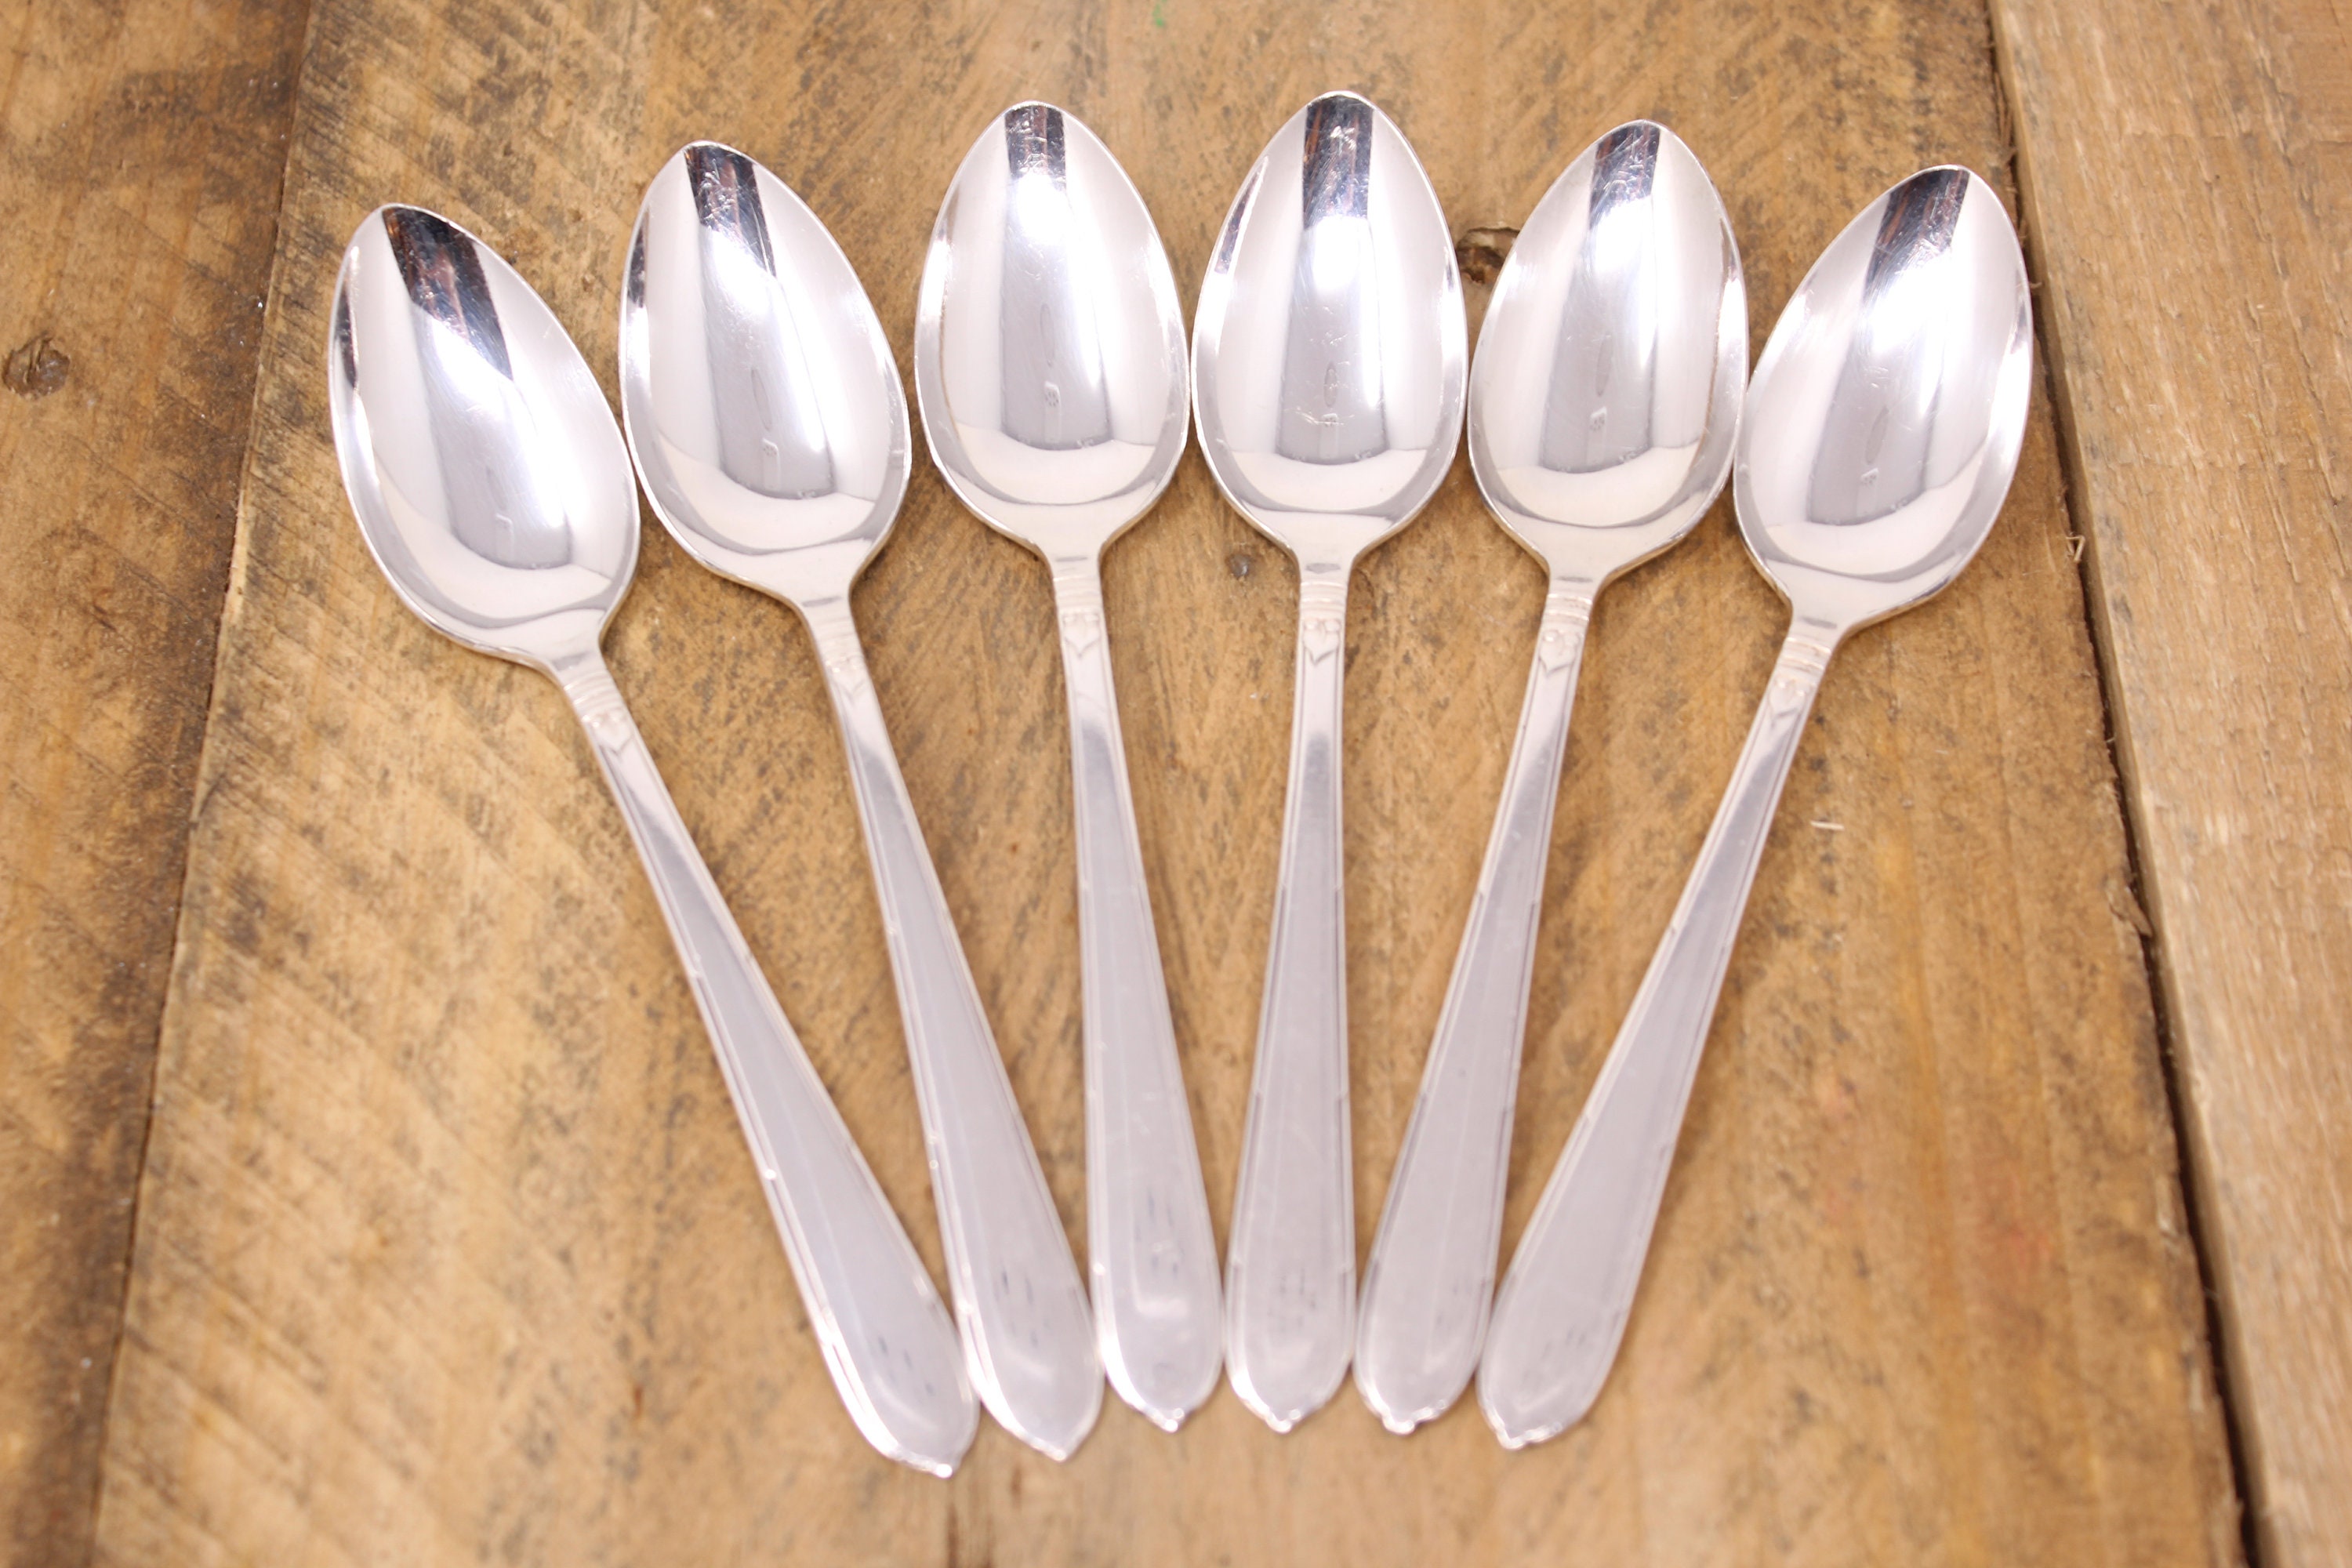 Mixed lot of Spoons BERKLEY SQUARE 1935 by Community Plate